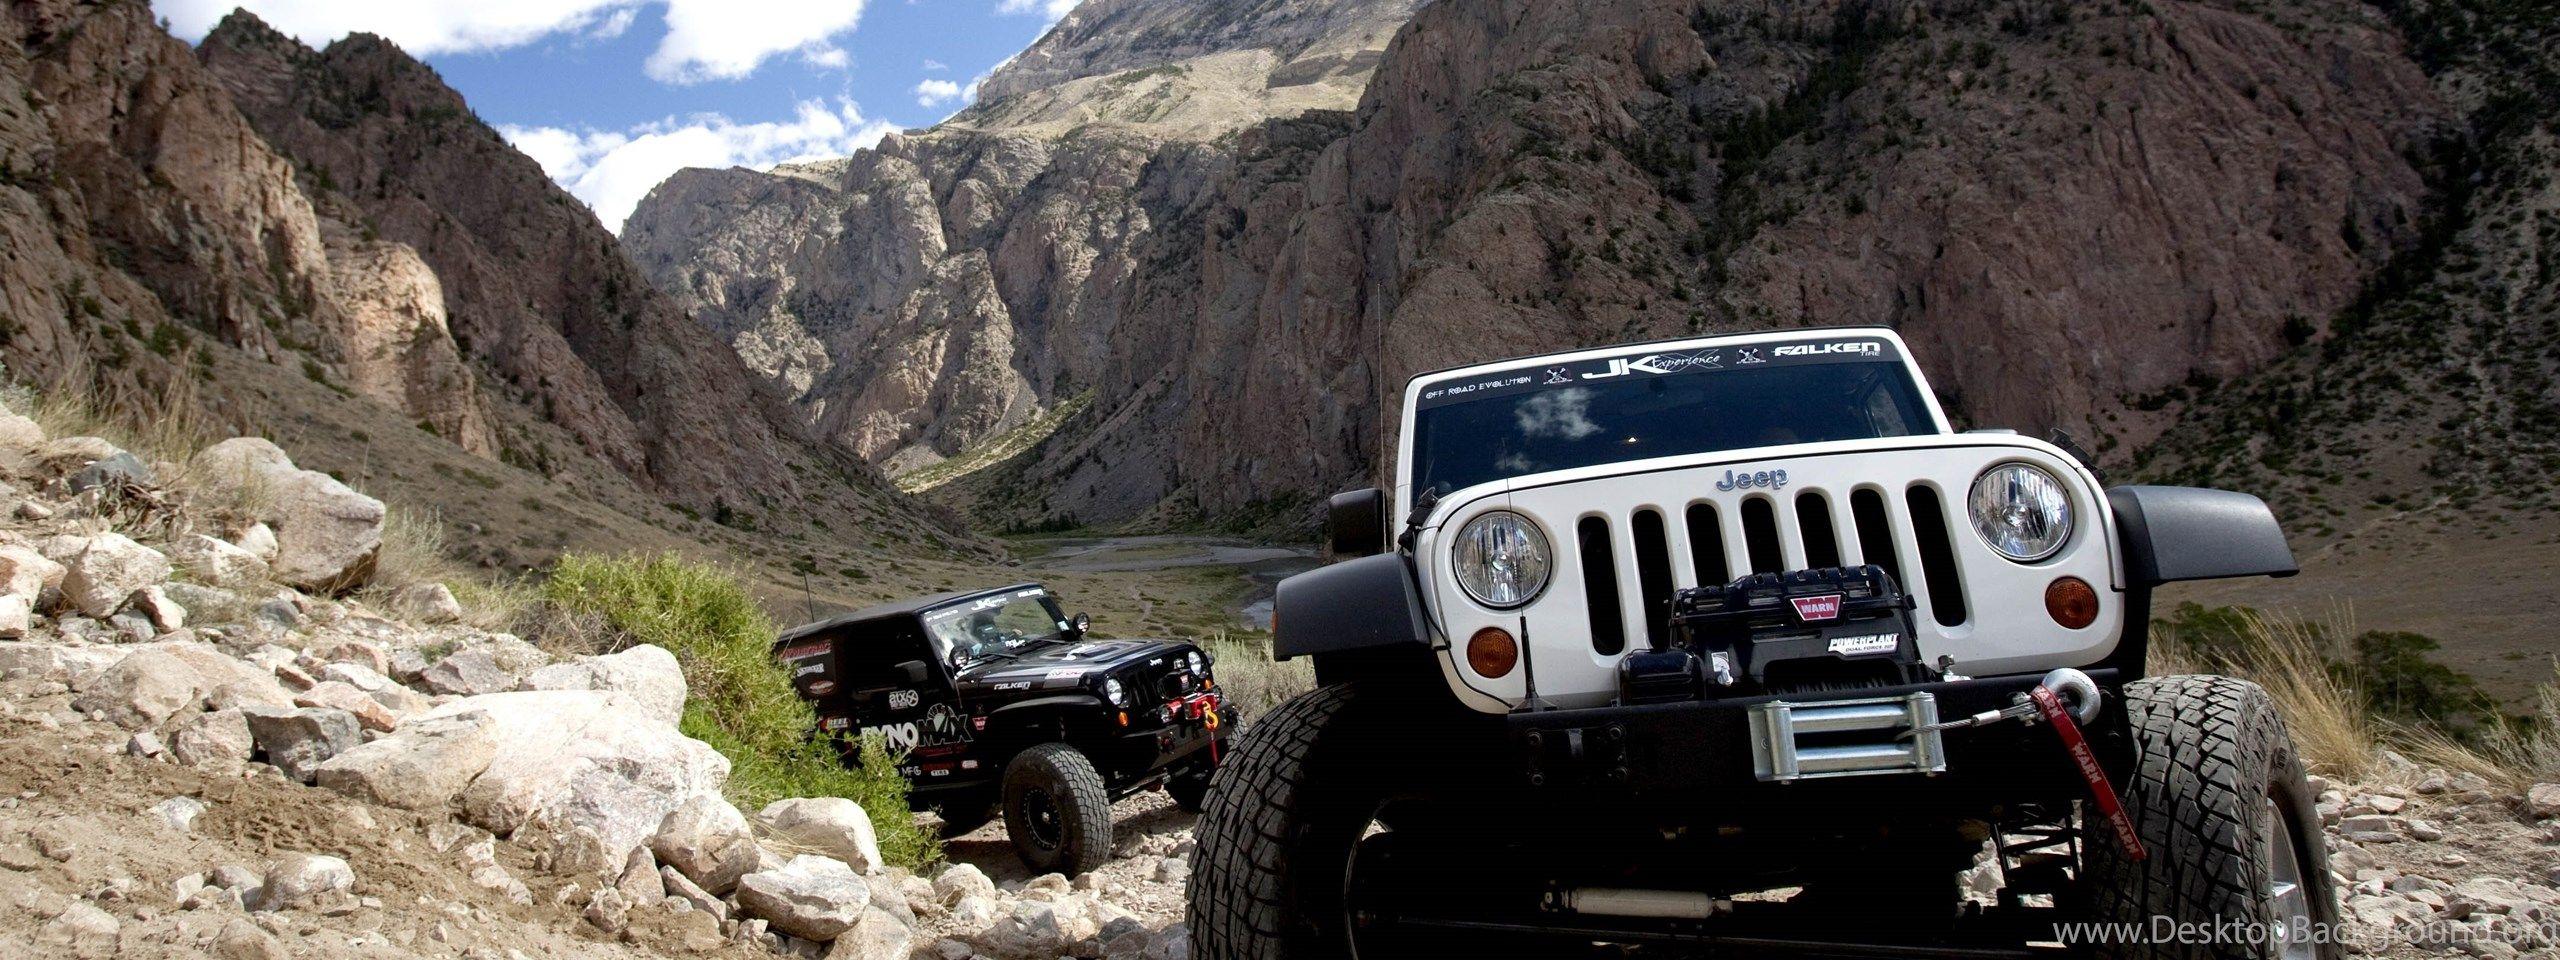 Jeep Dual Monitor Wallpapers Top Free Jeep Dual Monitor Backgrounds Wallpaperaccess